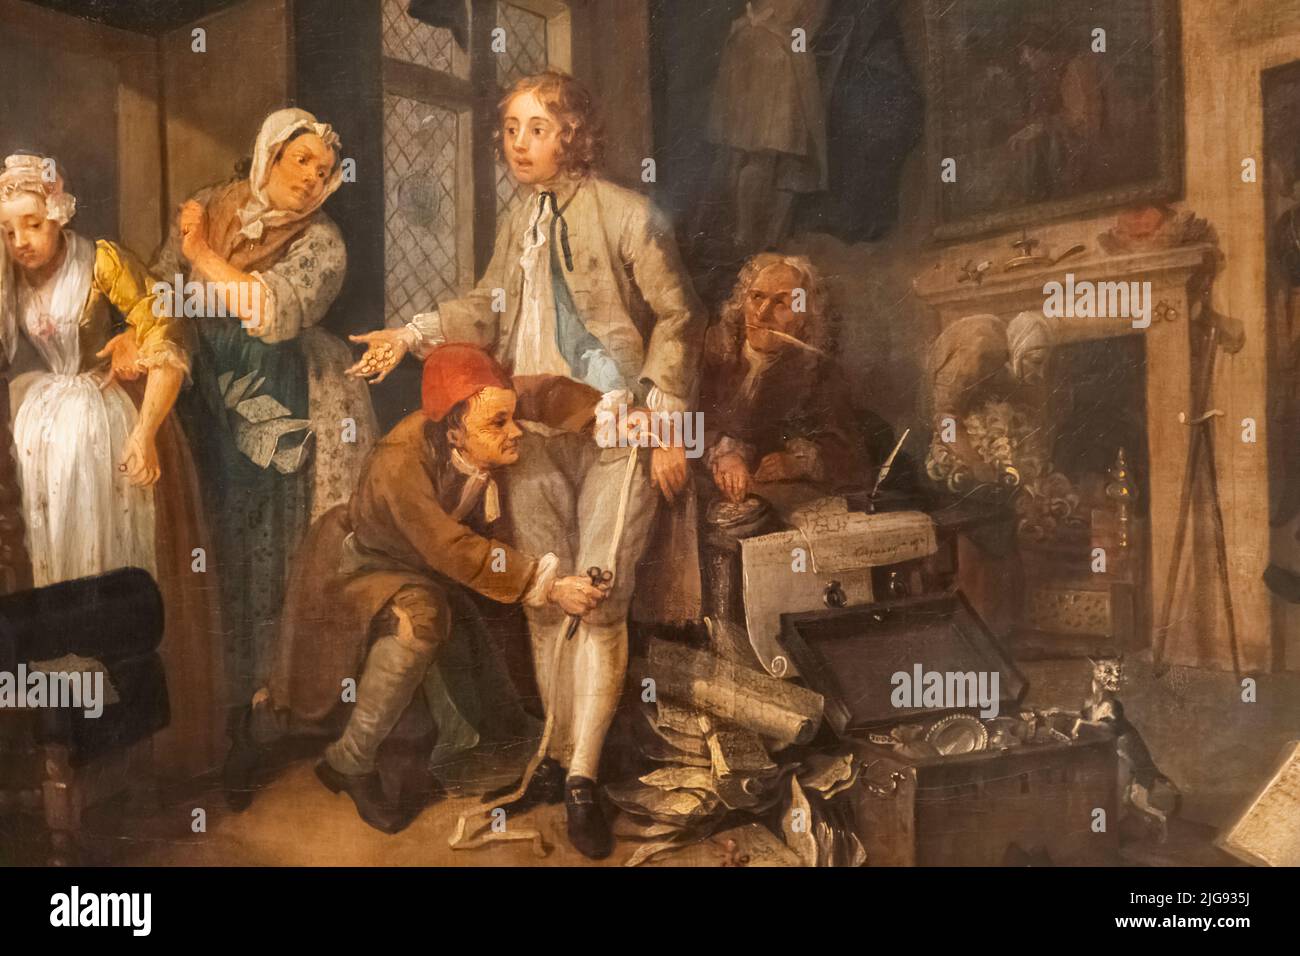 Painting from The Rake's Progress titled 'The Heir' by William Hogarth Stock Photo